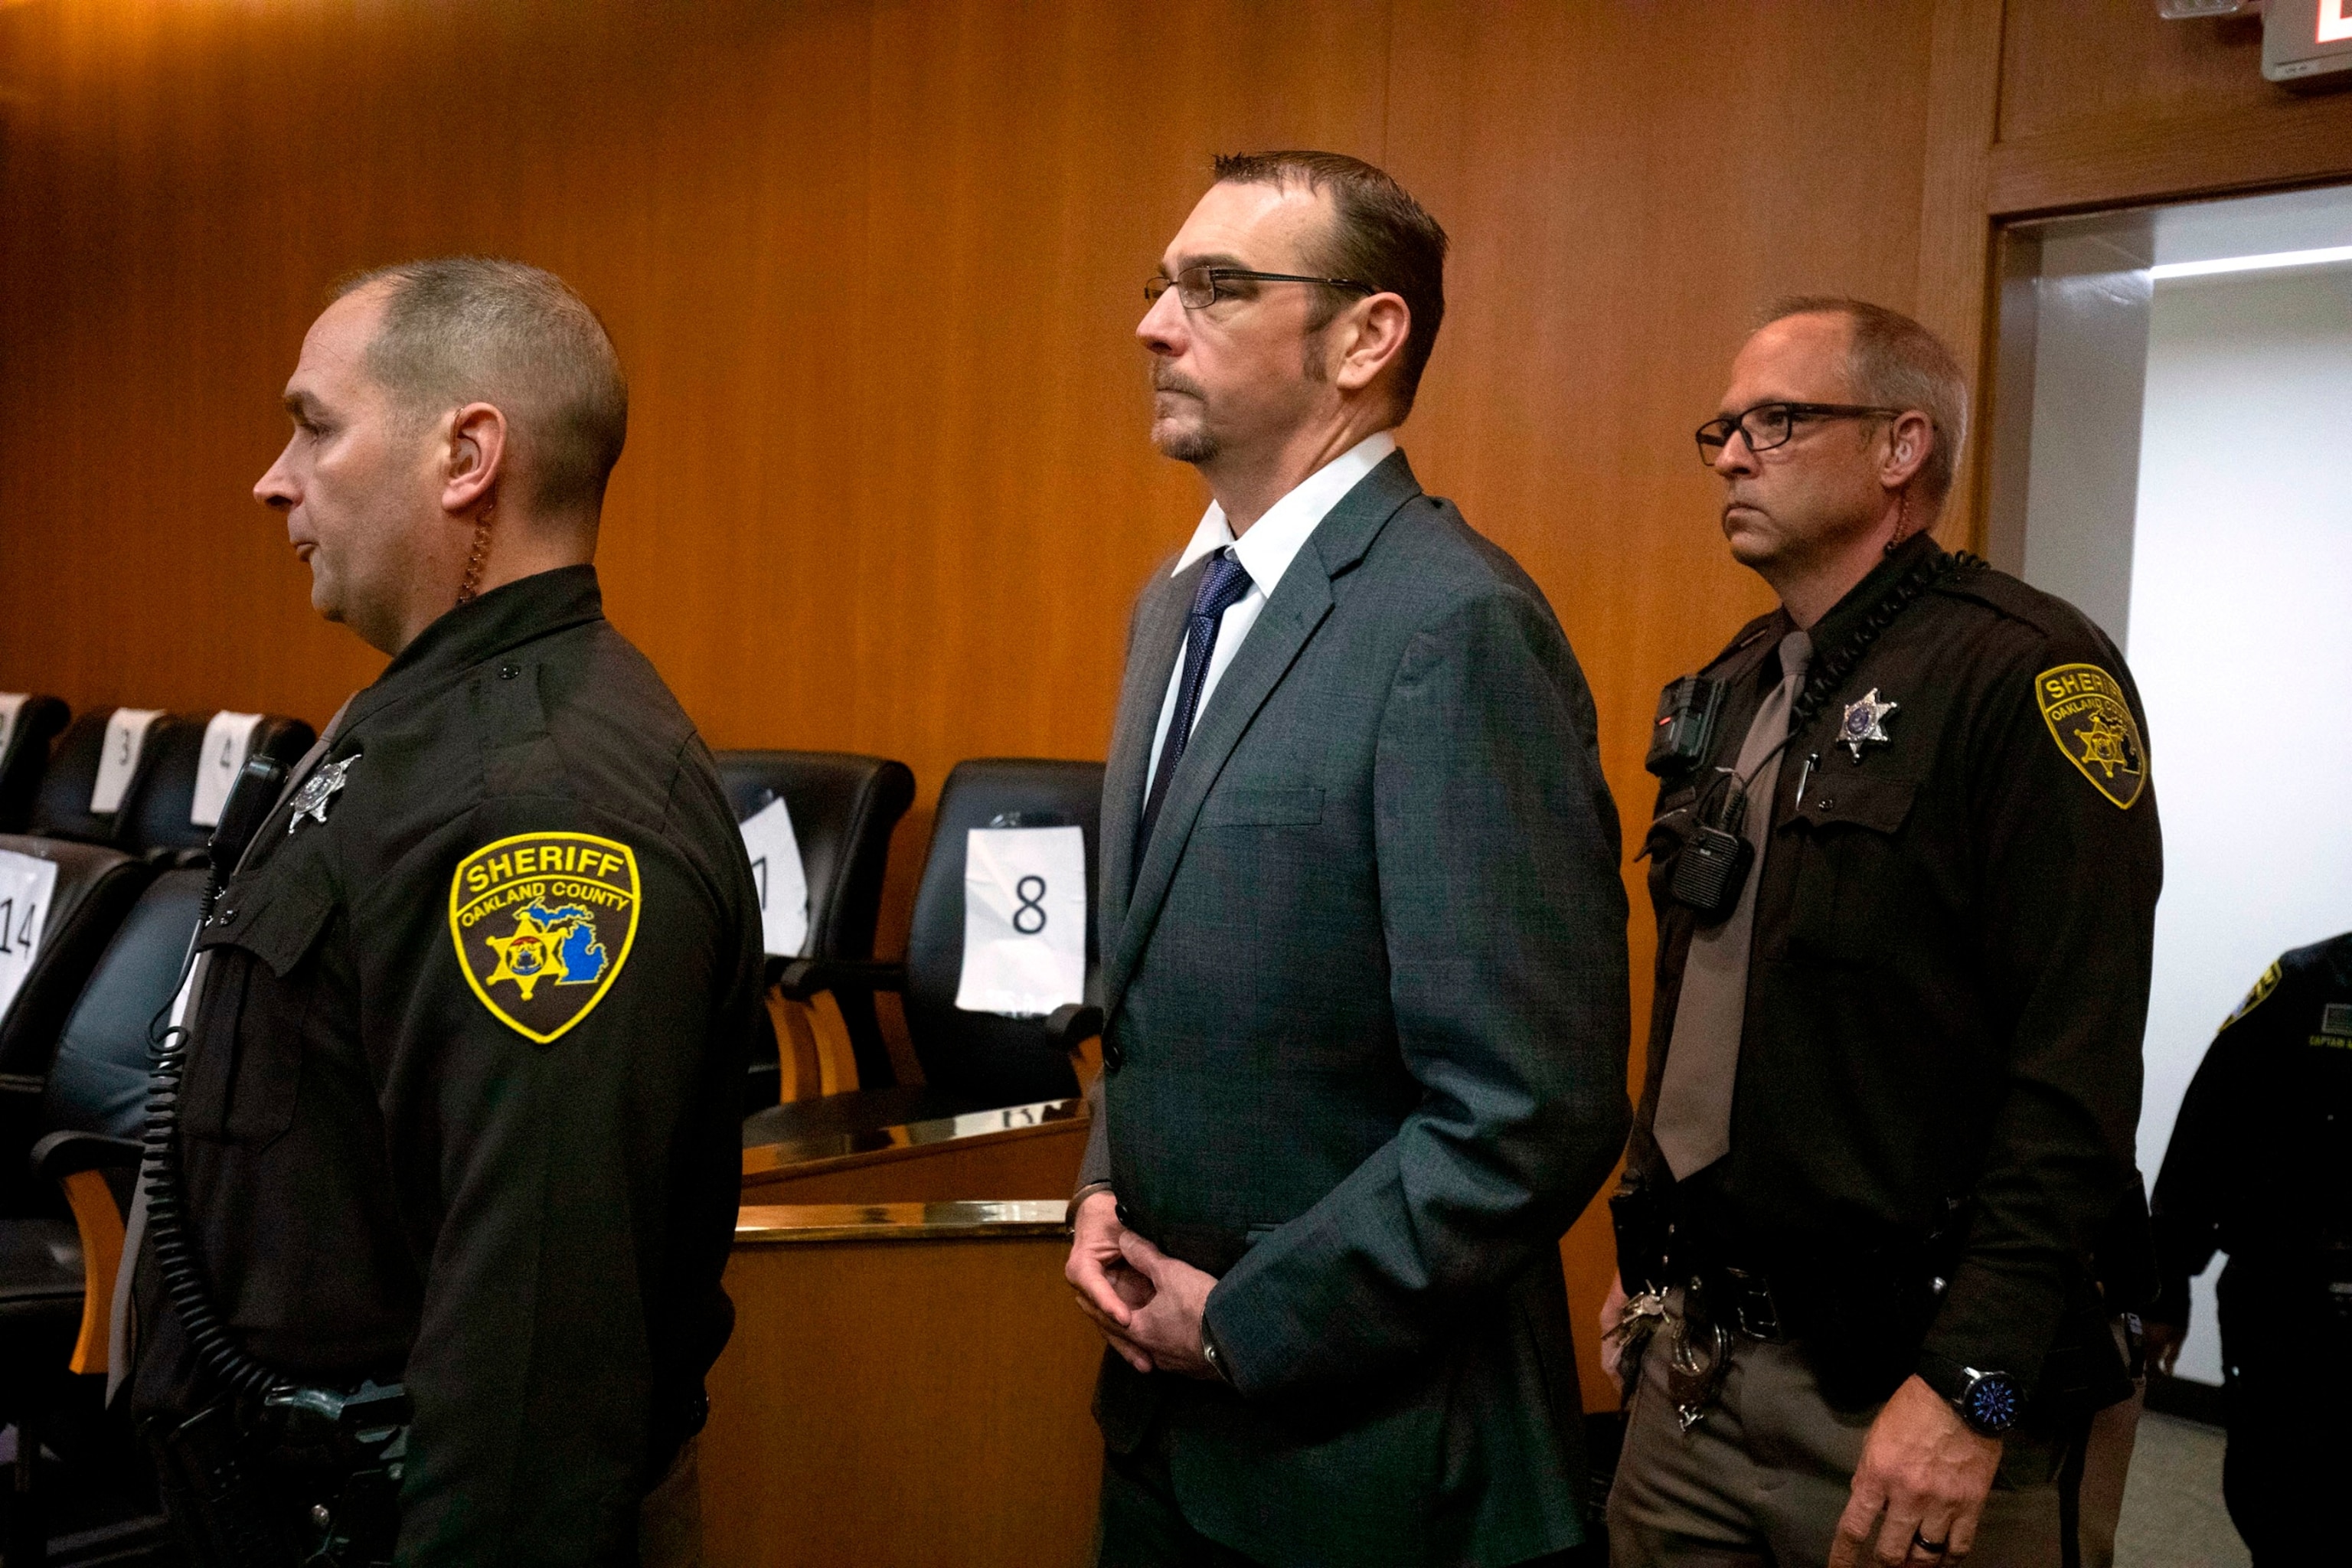 PHOTO: James Crumbley, father of Oxford High School shooter Ethan Crumbley, re-enters the courtroom after a break on the first day of his trial on four counts of involuntary manslaughter, on March 7, 2024 at Oakland County Circuit Court in Pontiac, Mich.